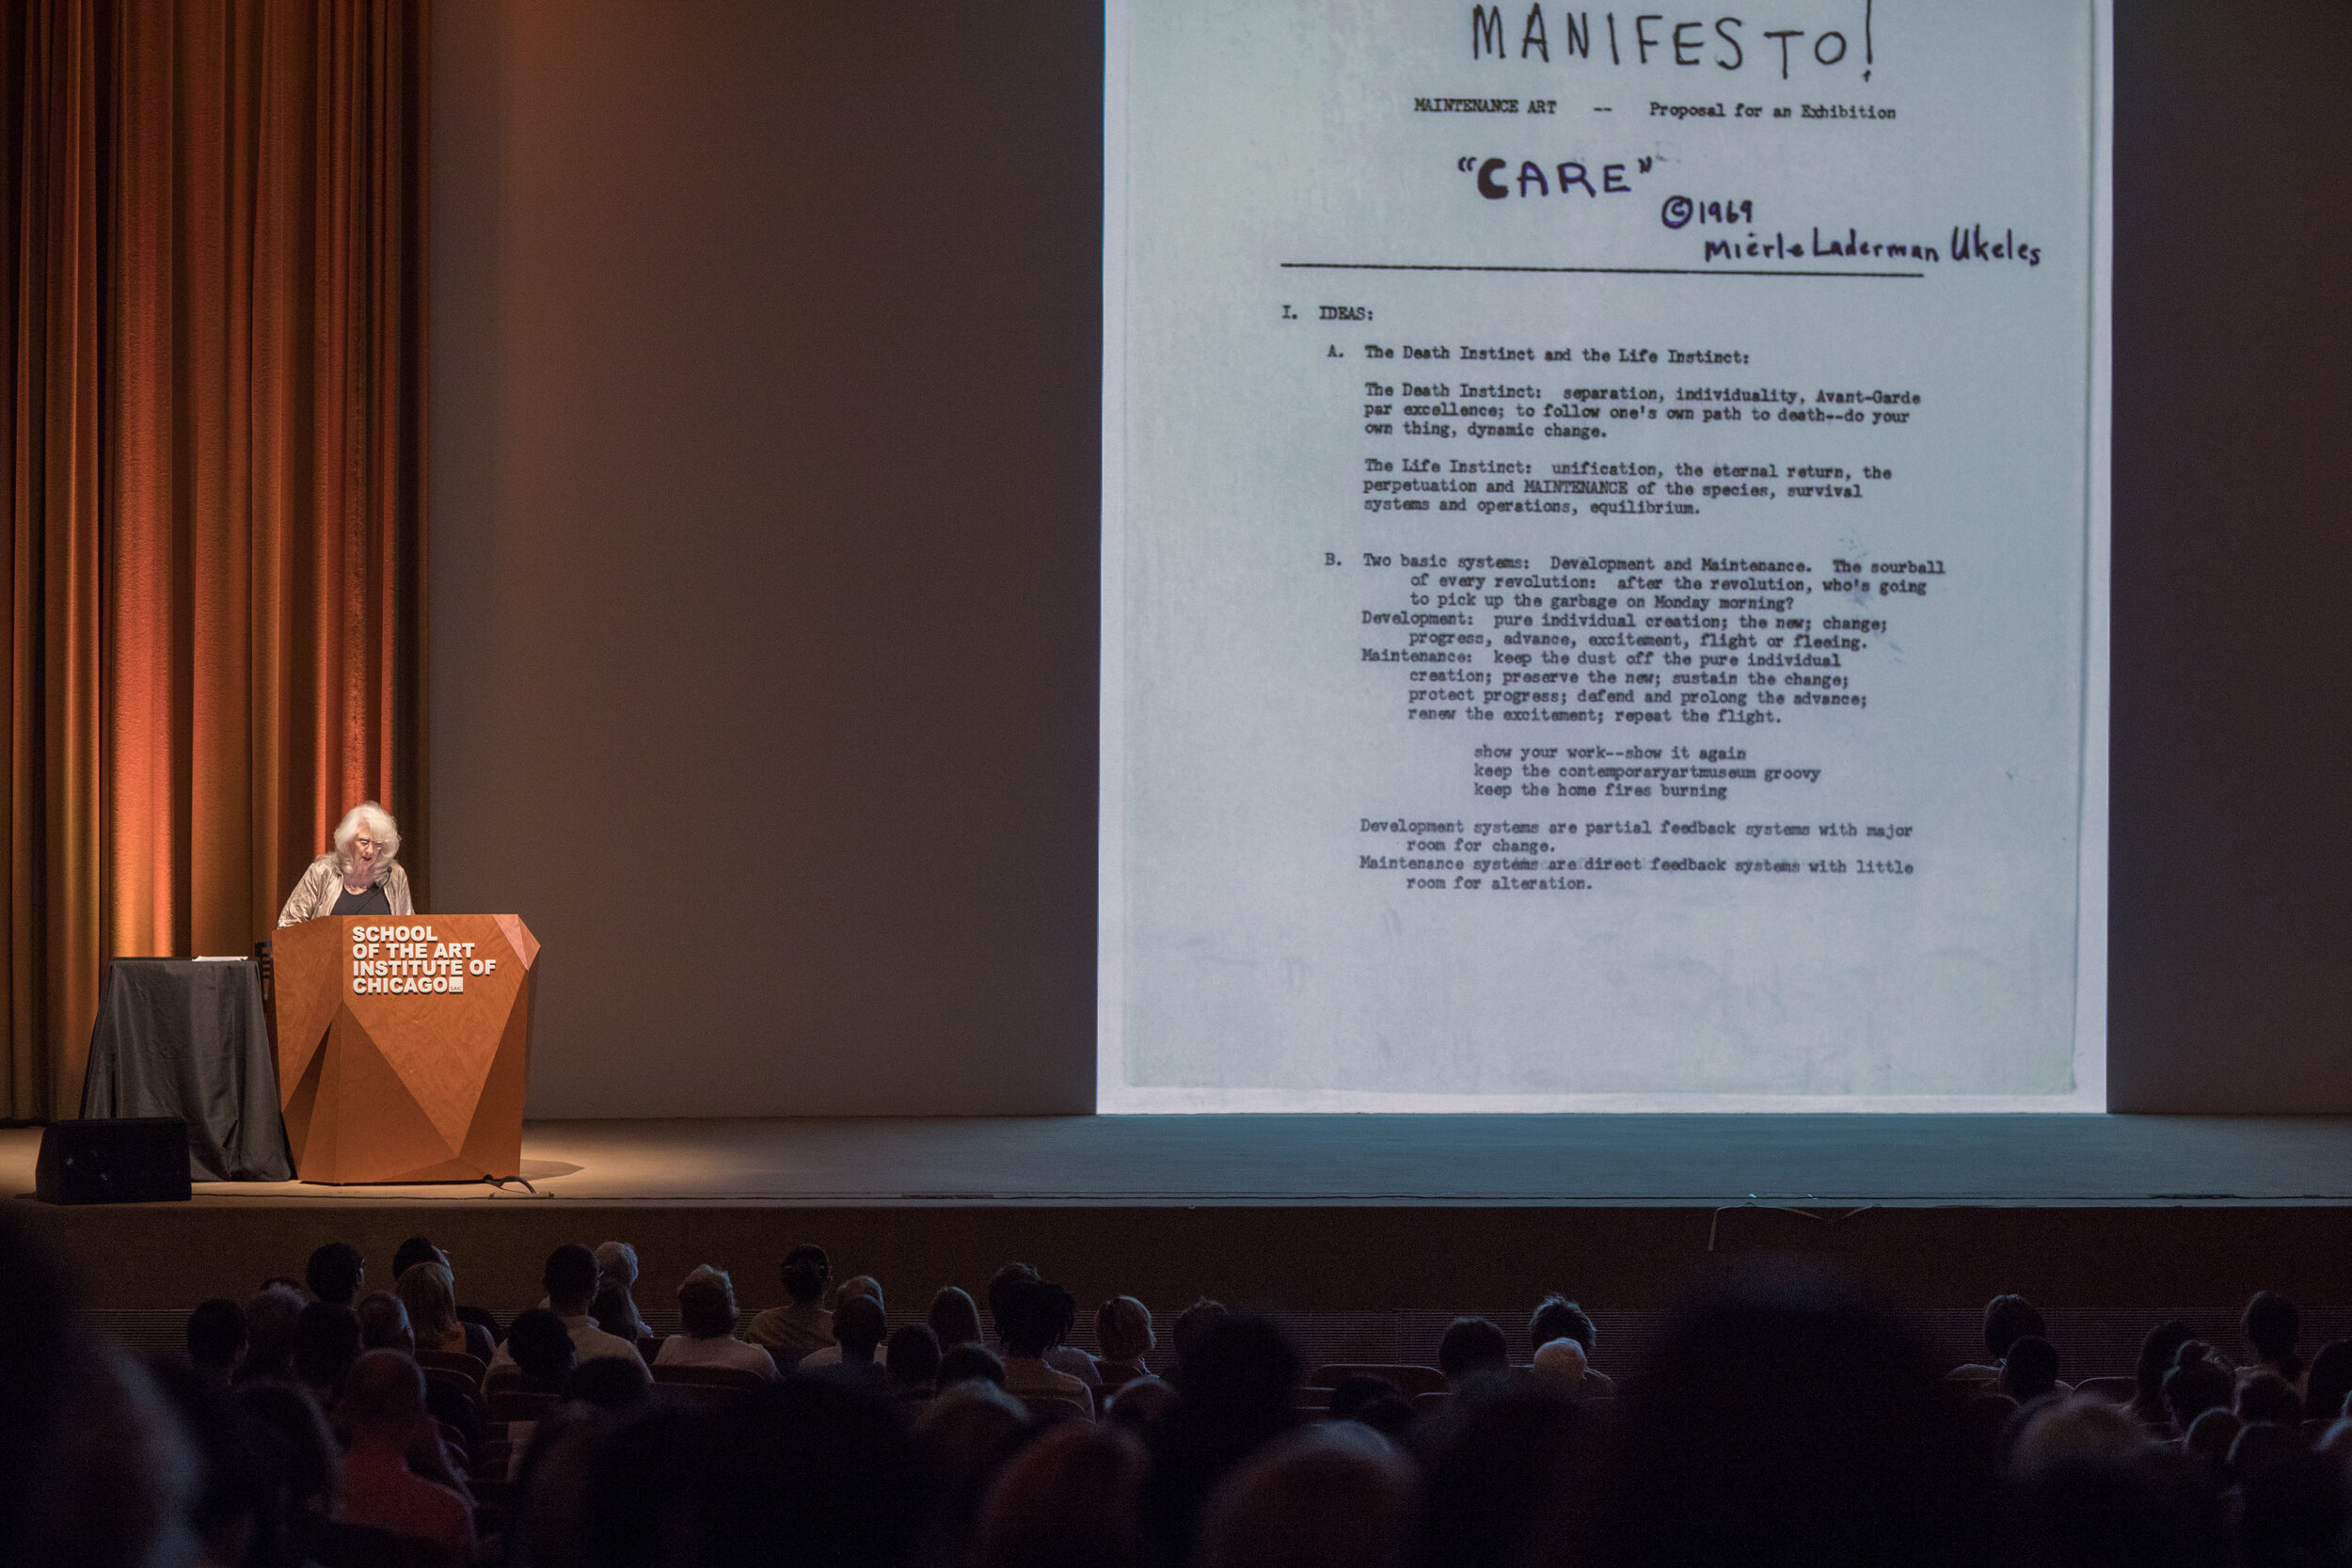  Visiting Artists Program Lecture: Mierle Laderman Ukeles, The Art Institute of Chicago, Rubloff Auditorium, 2019 